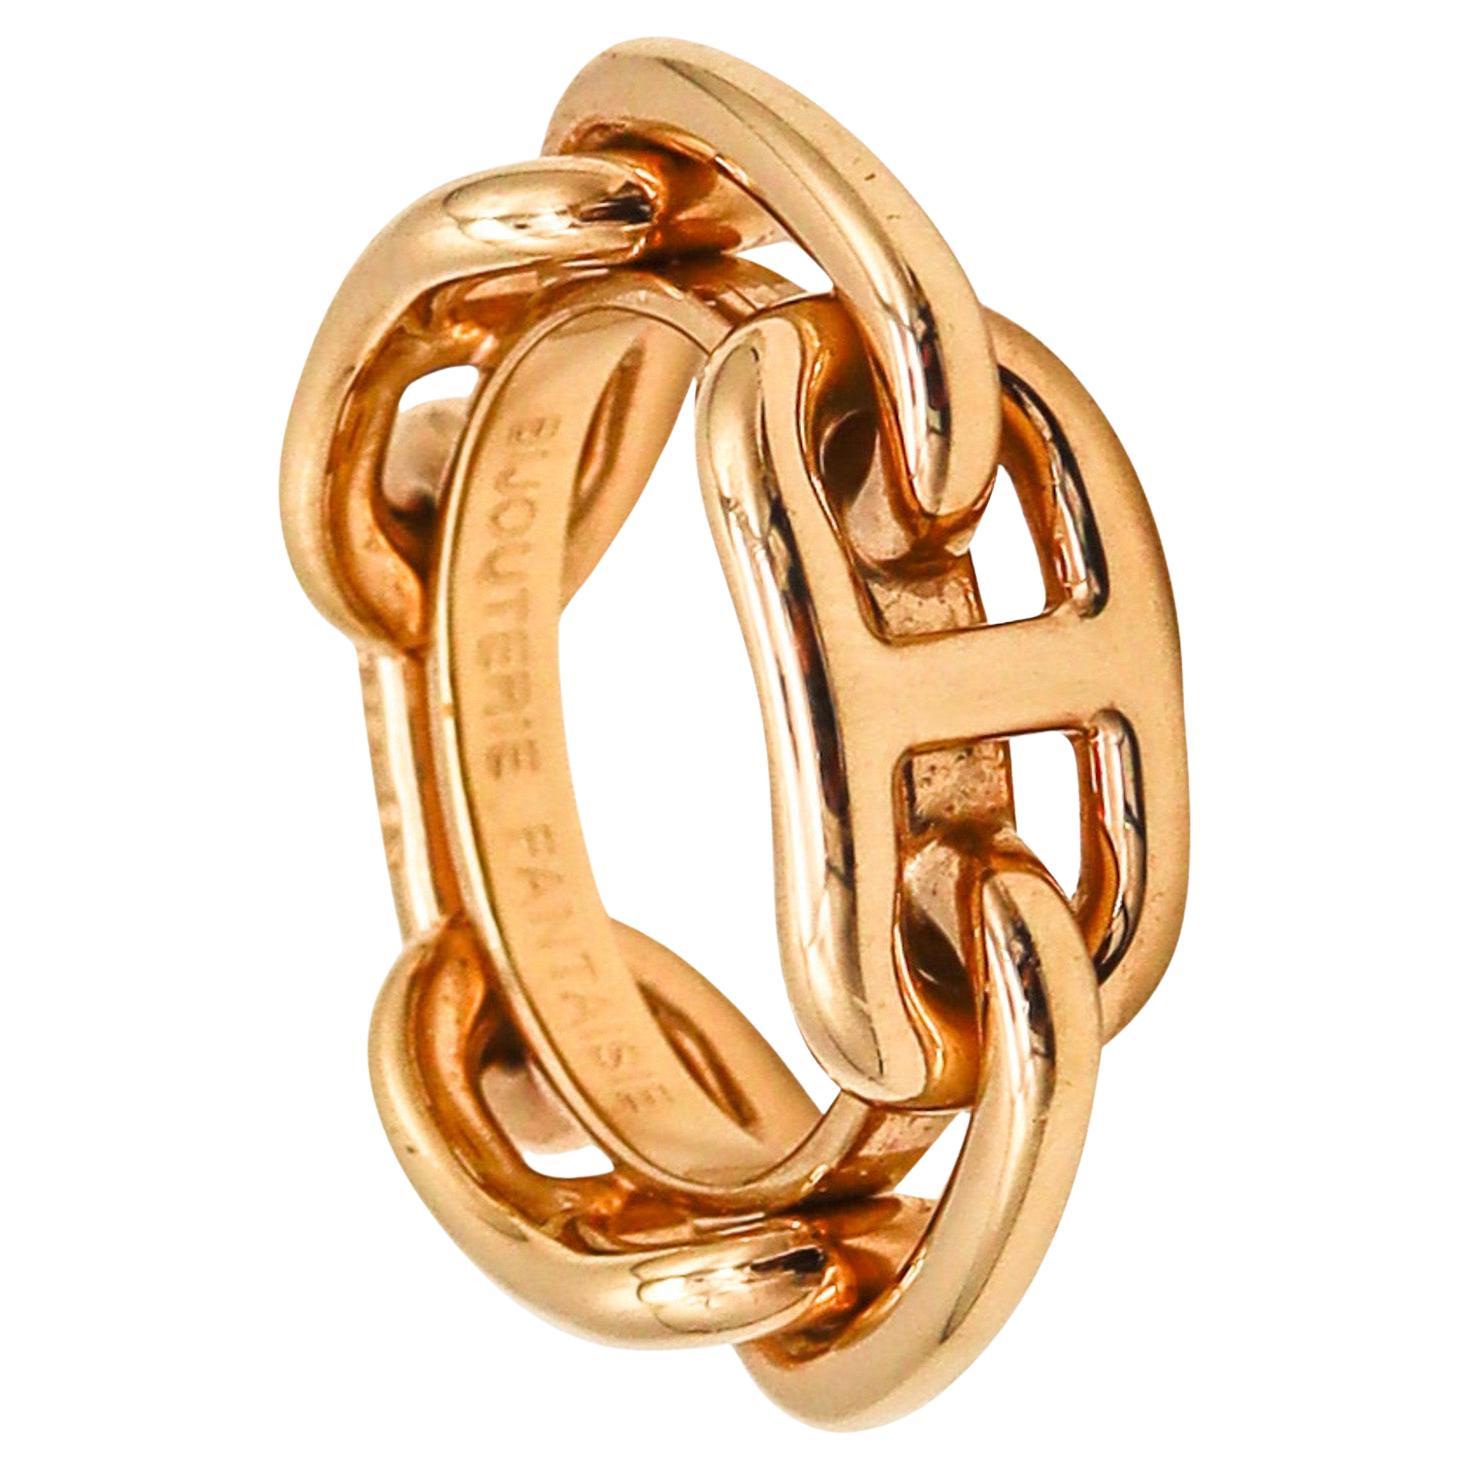 Hermes Paris Vintage Chain D'Ancre Scarf Ring In 18Kt Yellow Gold Plated In Box